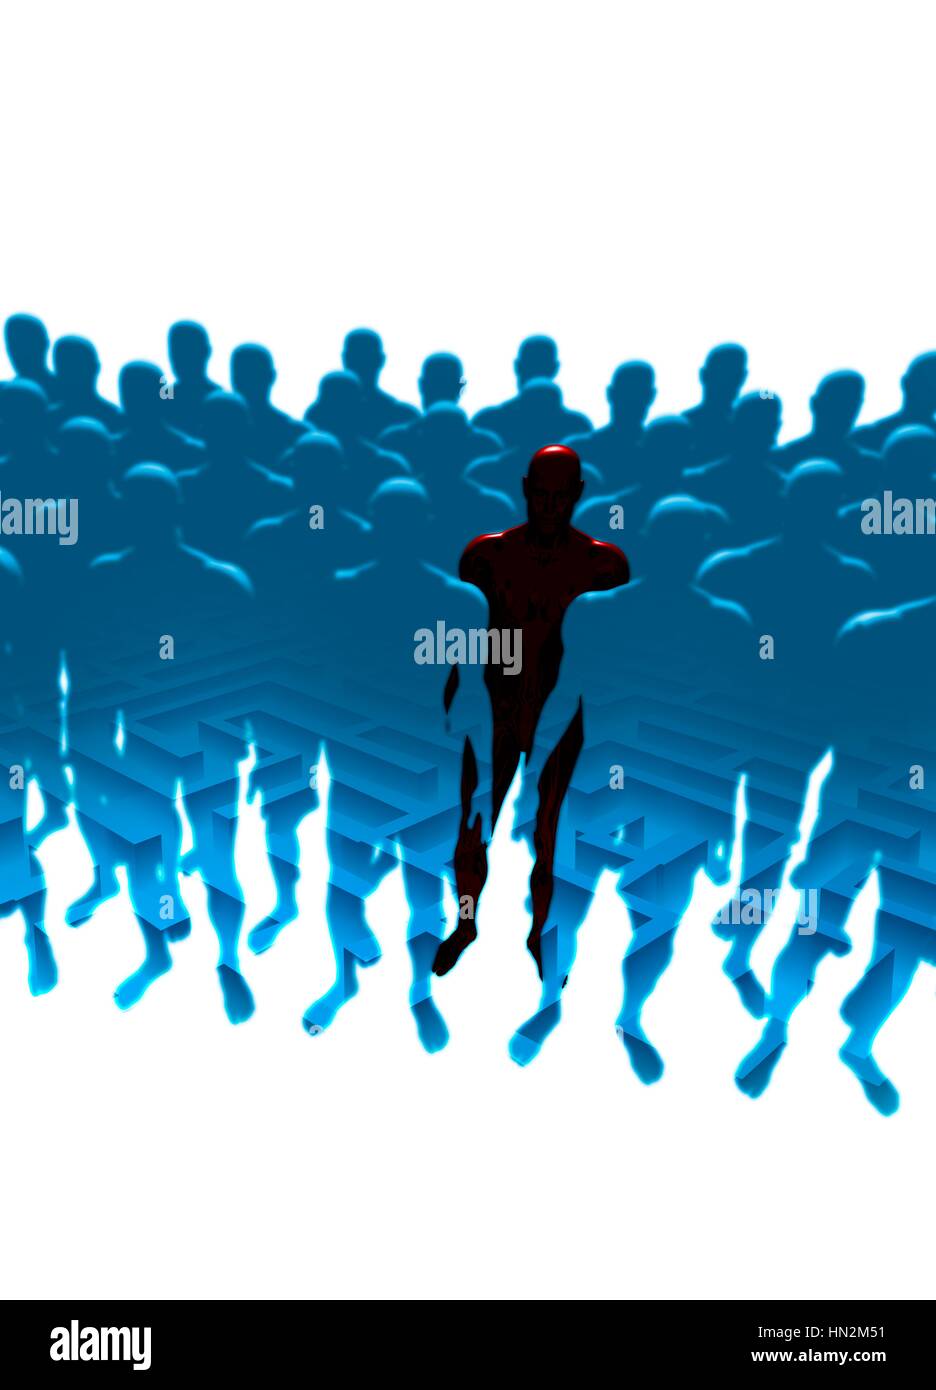 Human figure standing out from the crowd, illustration. Stock Photo